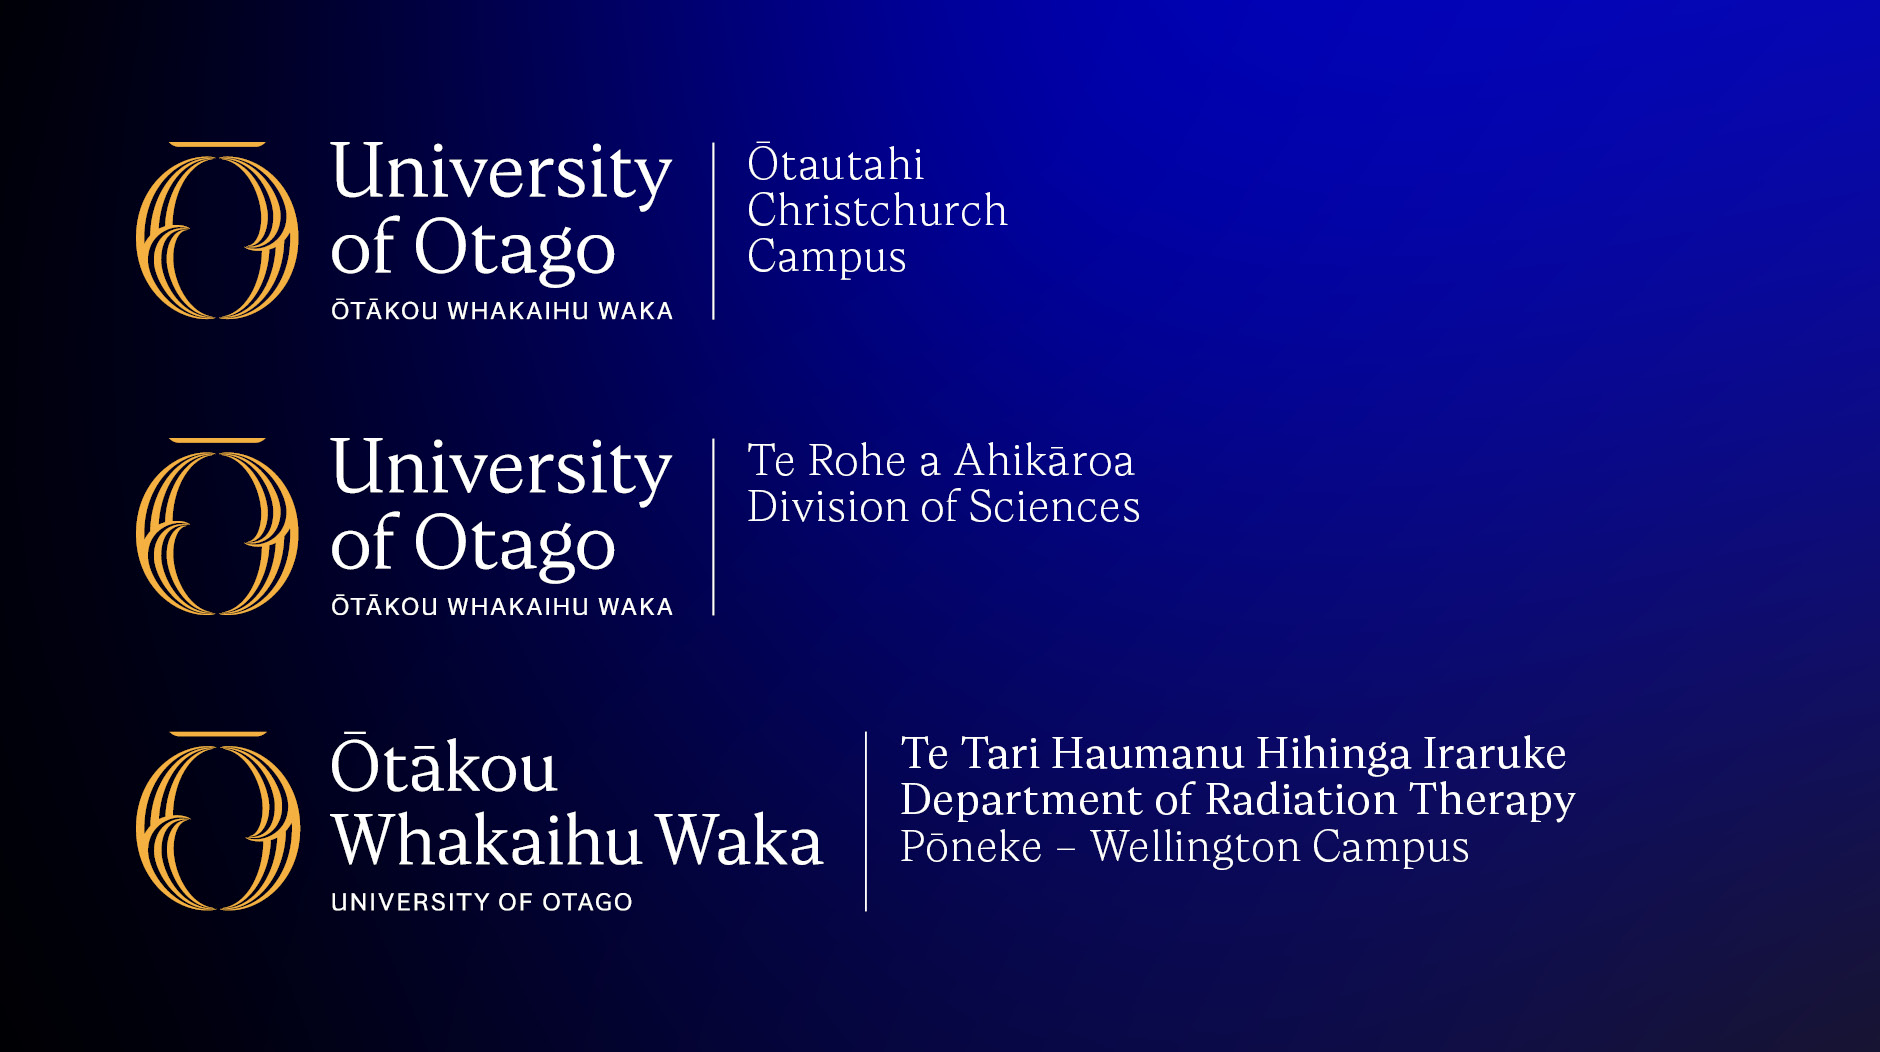 University of Otago wordmarks for Christchurch campus, Division of Sciences and Department of Radiation Therapy, Wellington Campus.